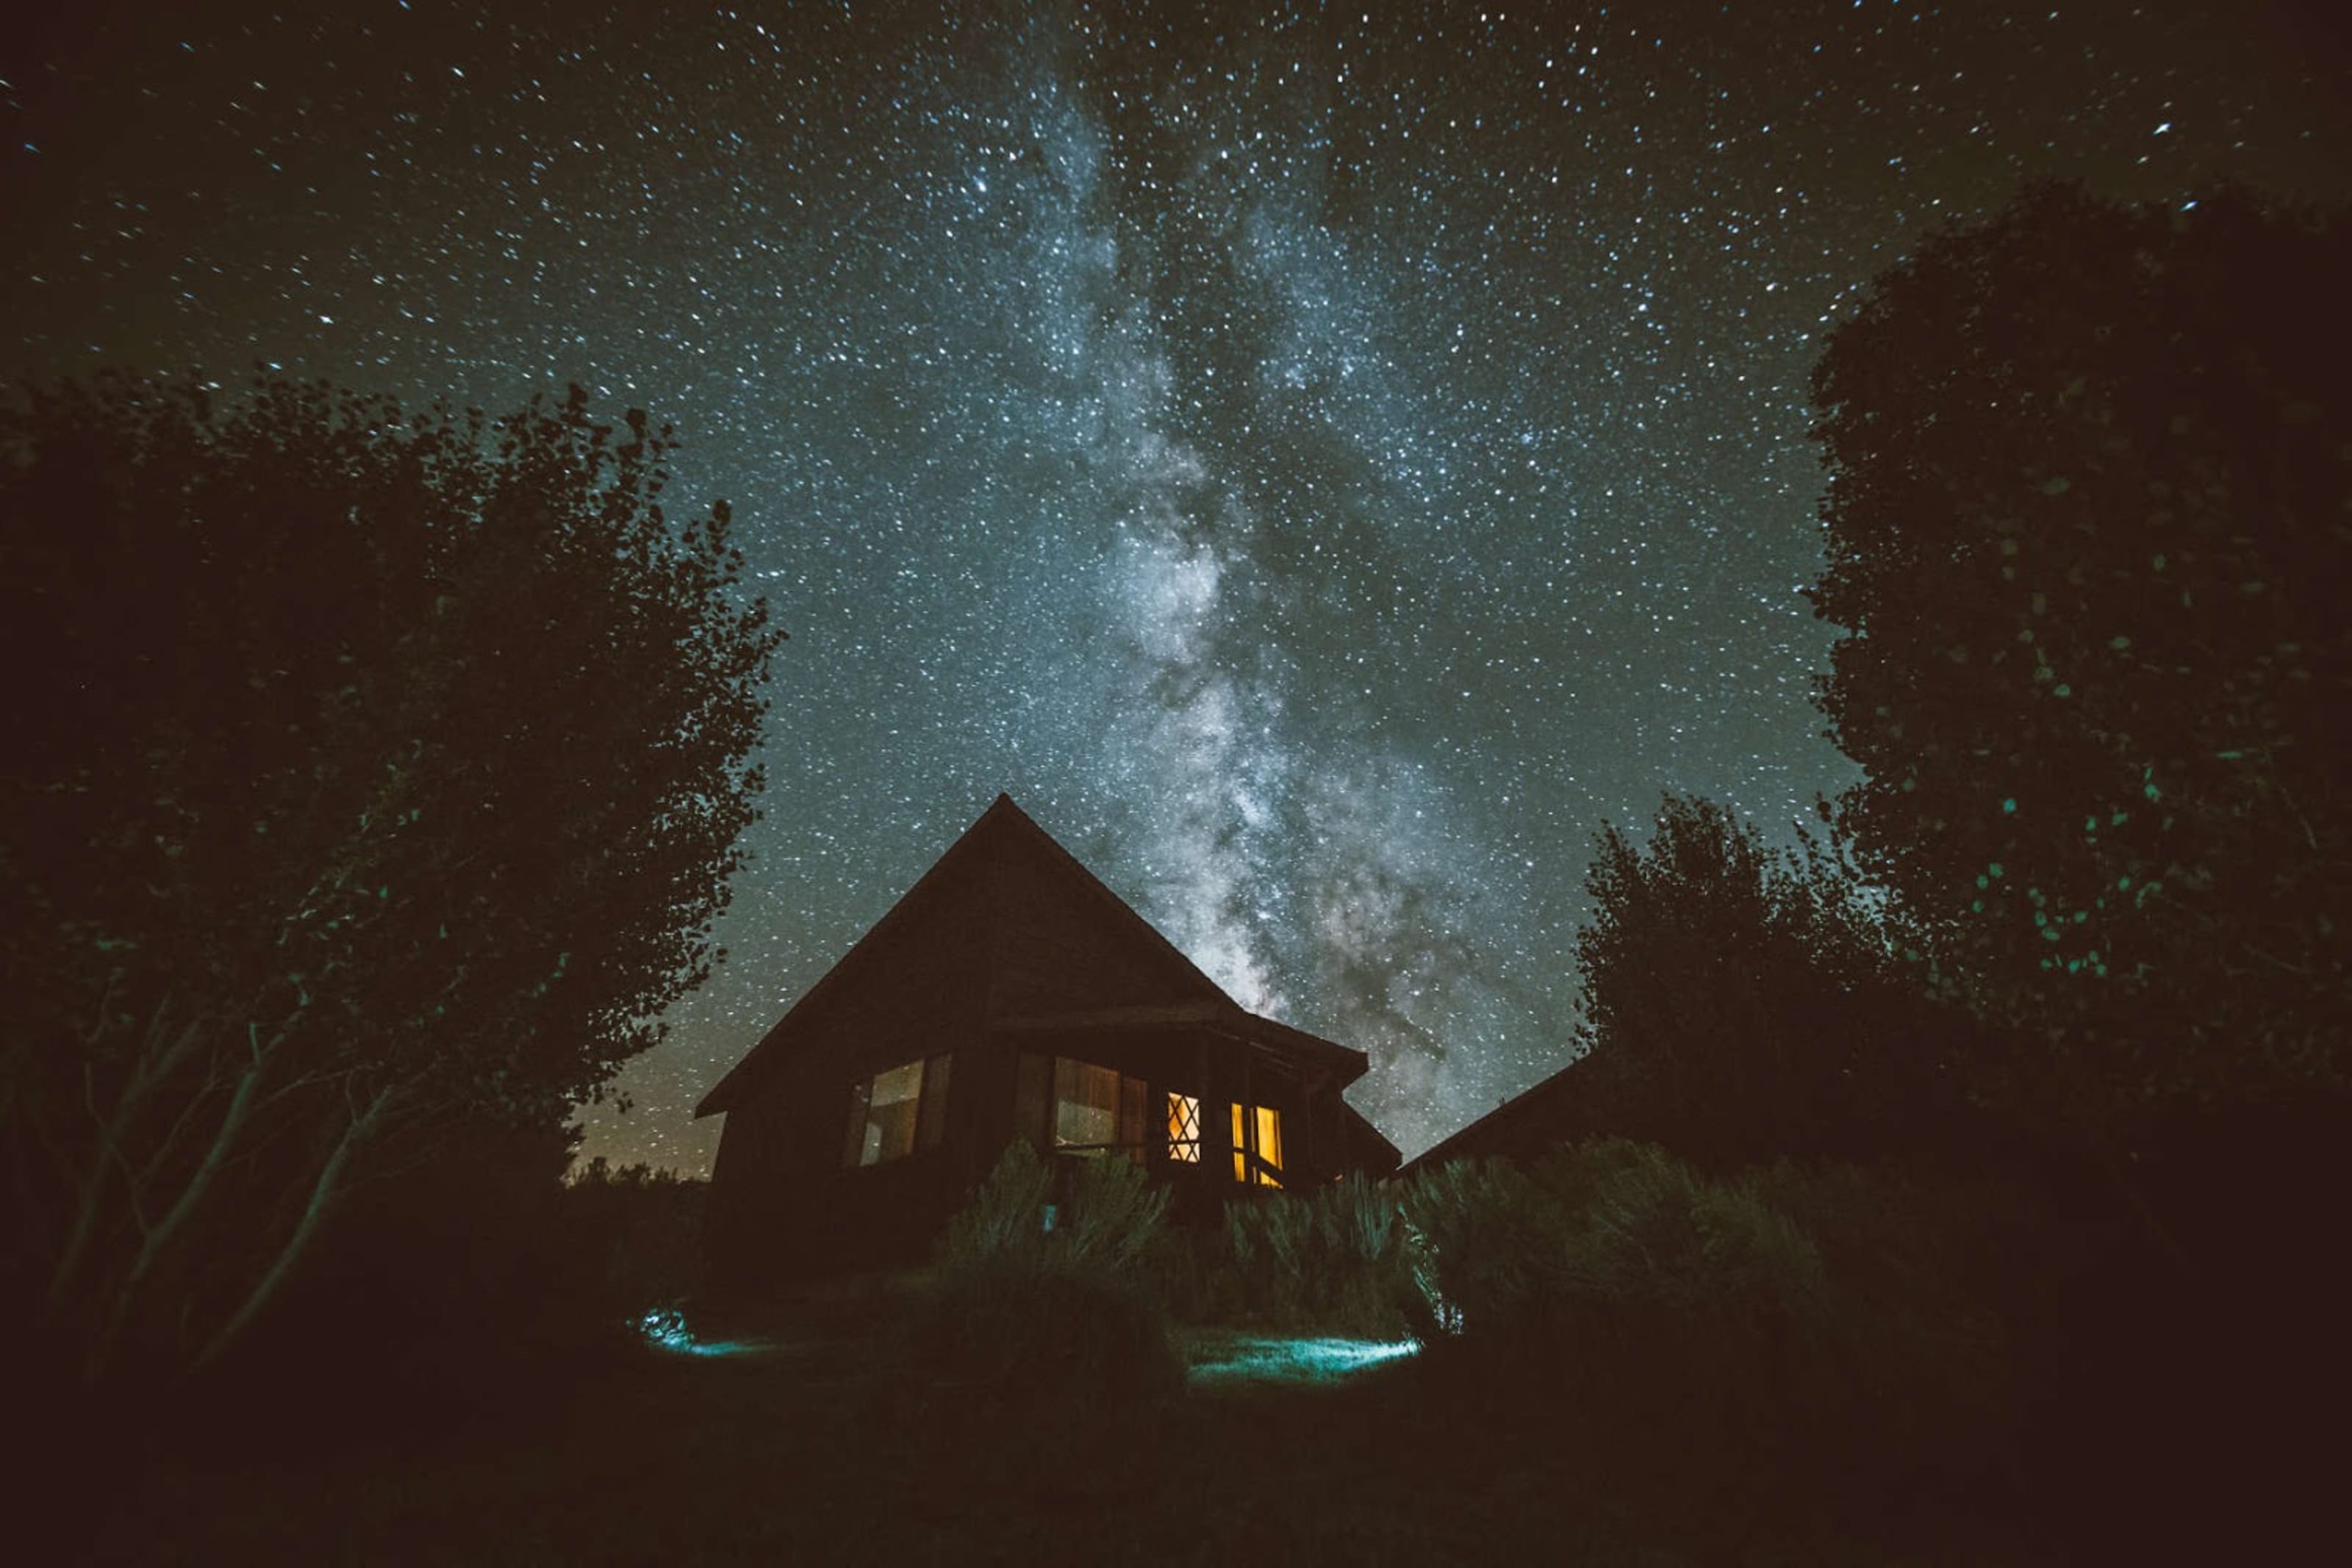 Stargazing 101: How to View the Night Sky